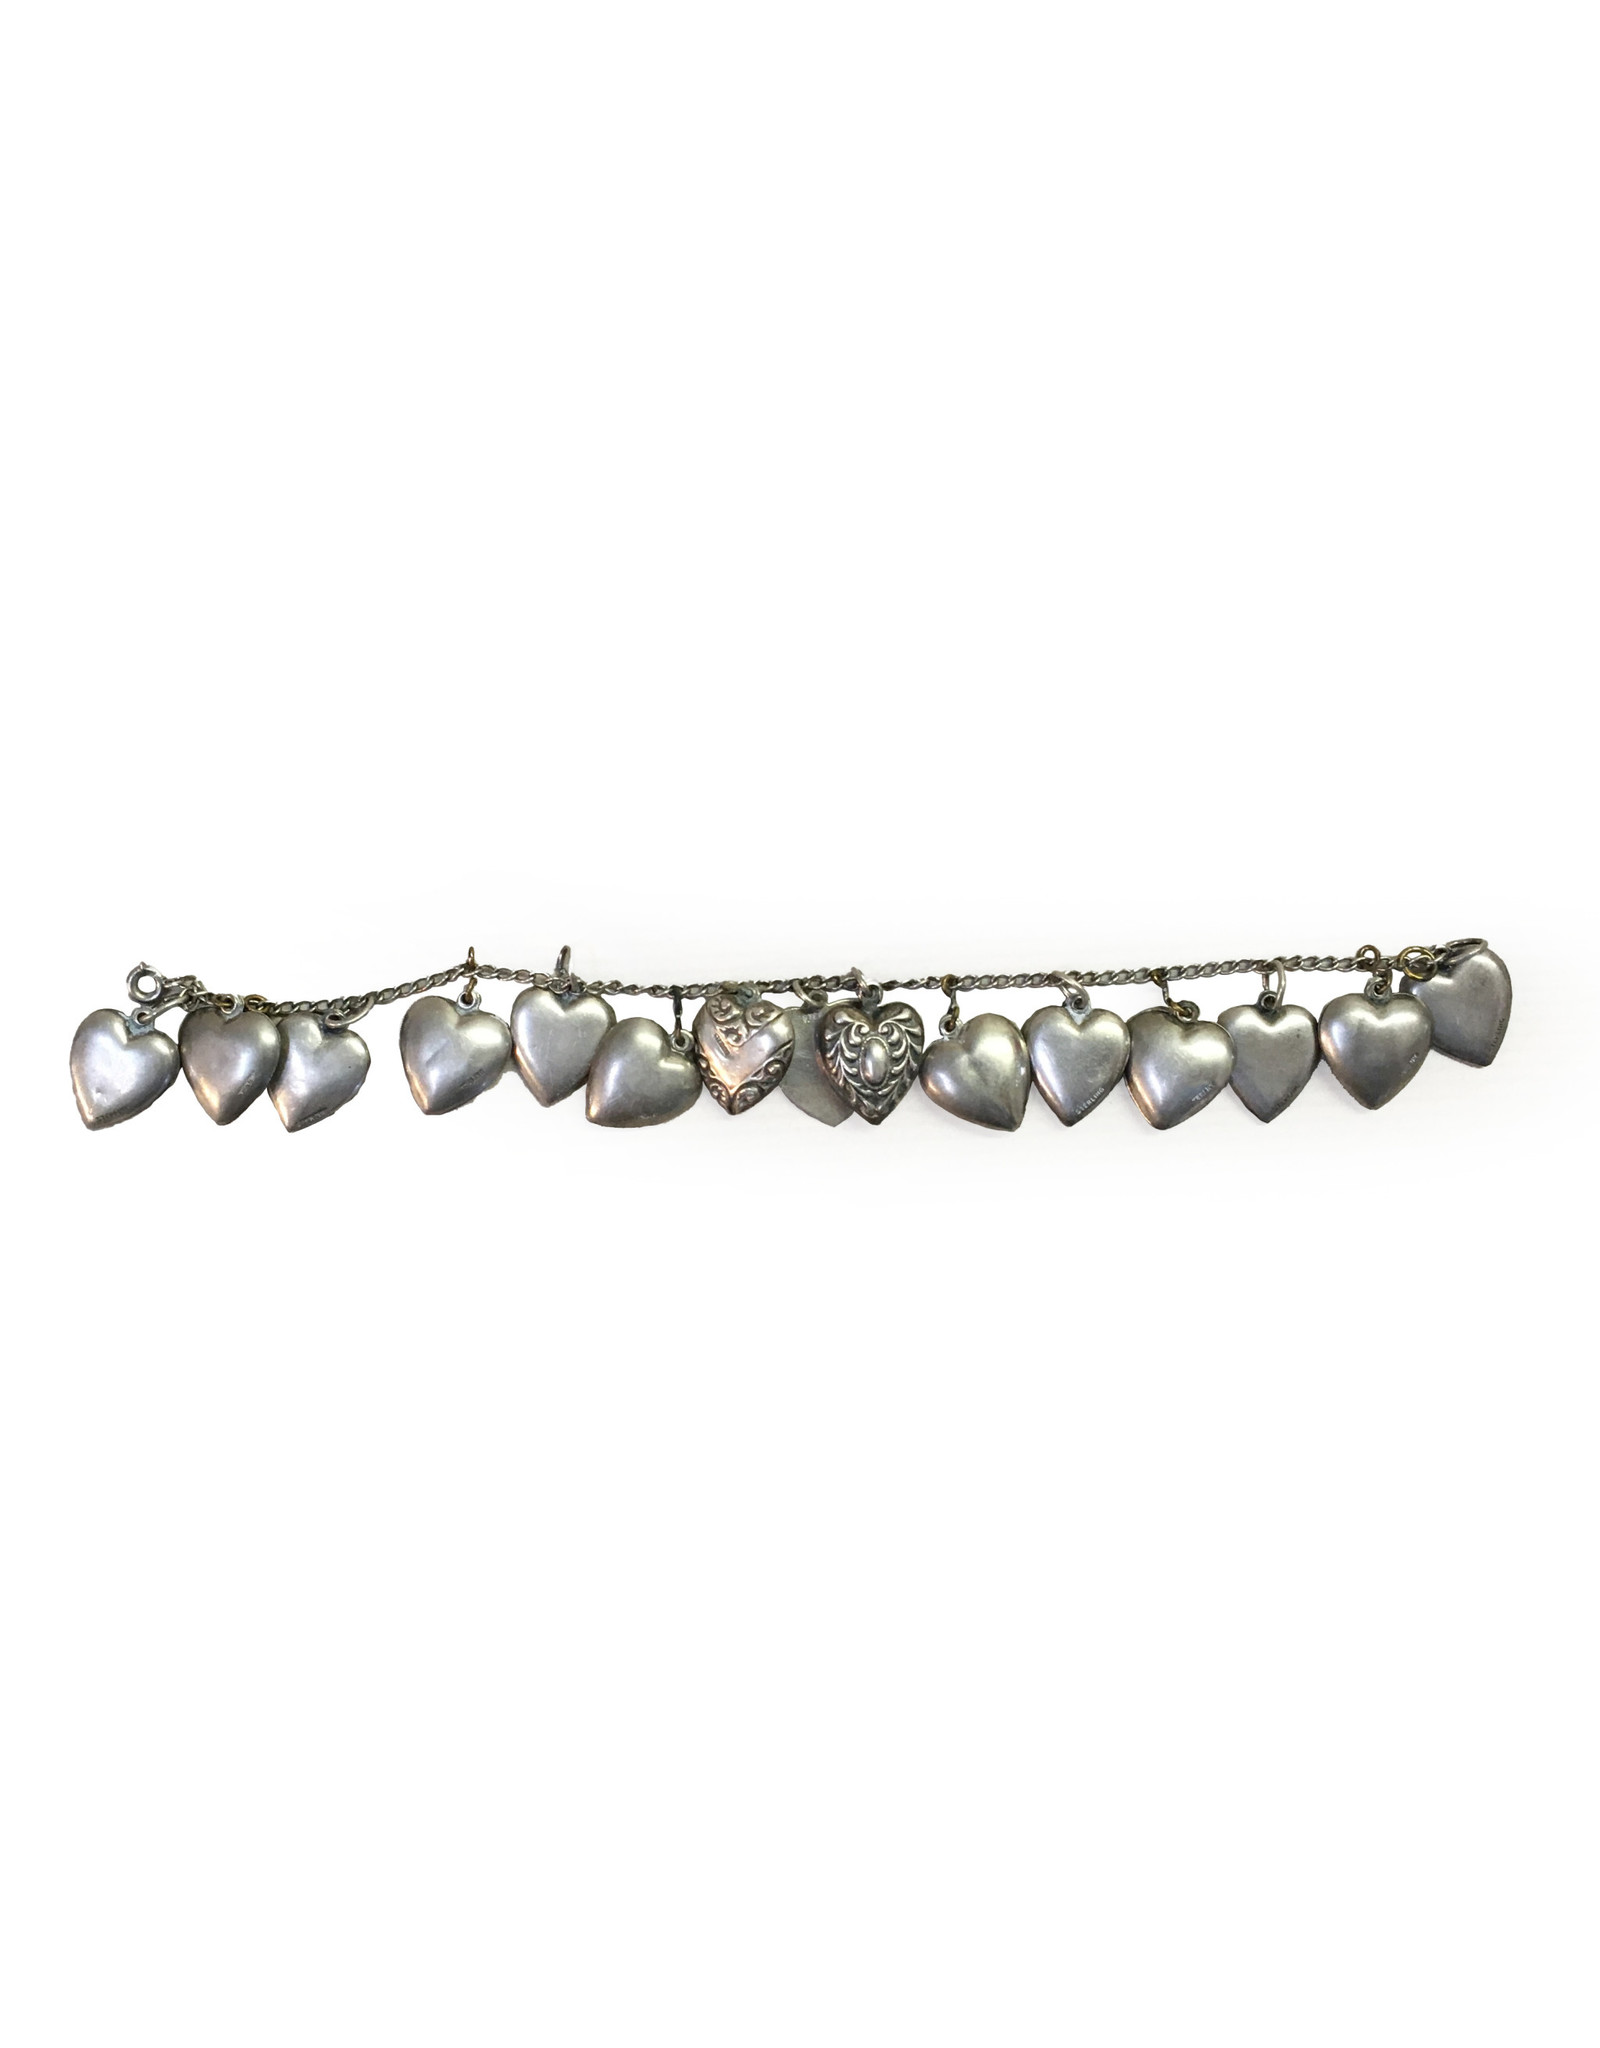 7¼ In. Vintage Sterling Puffy Heart Charms Bracelet